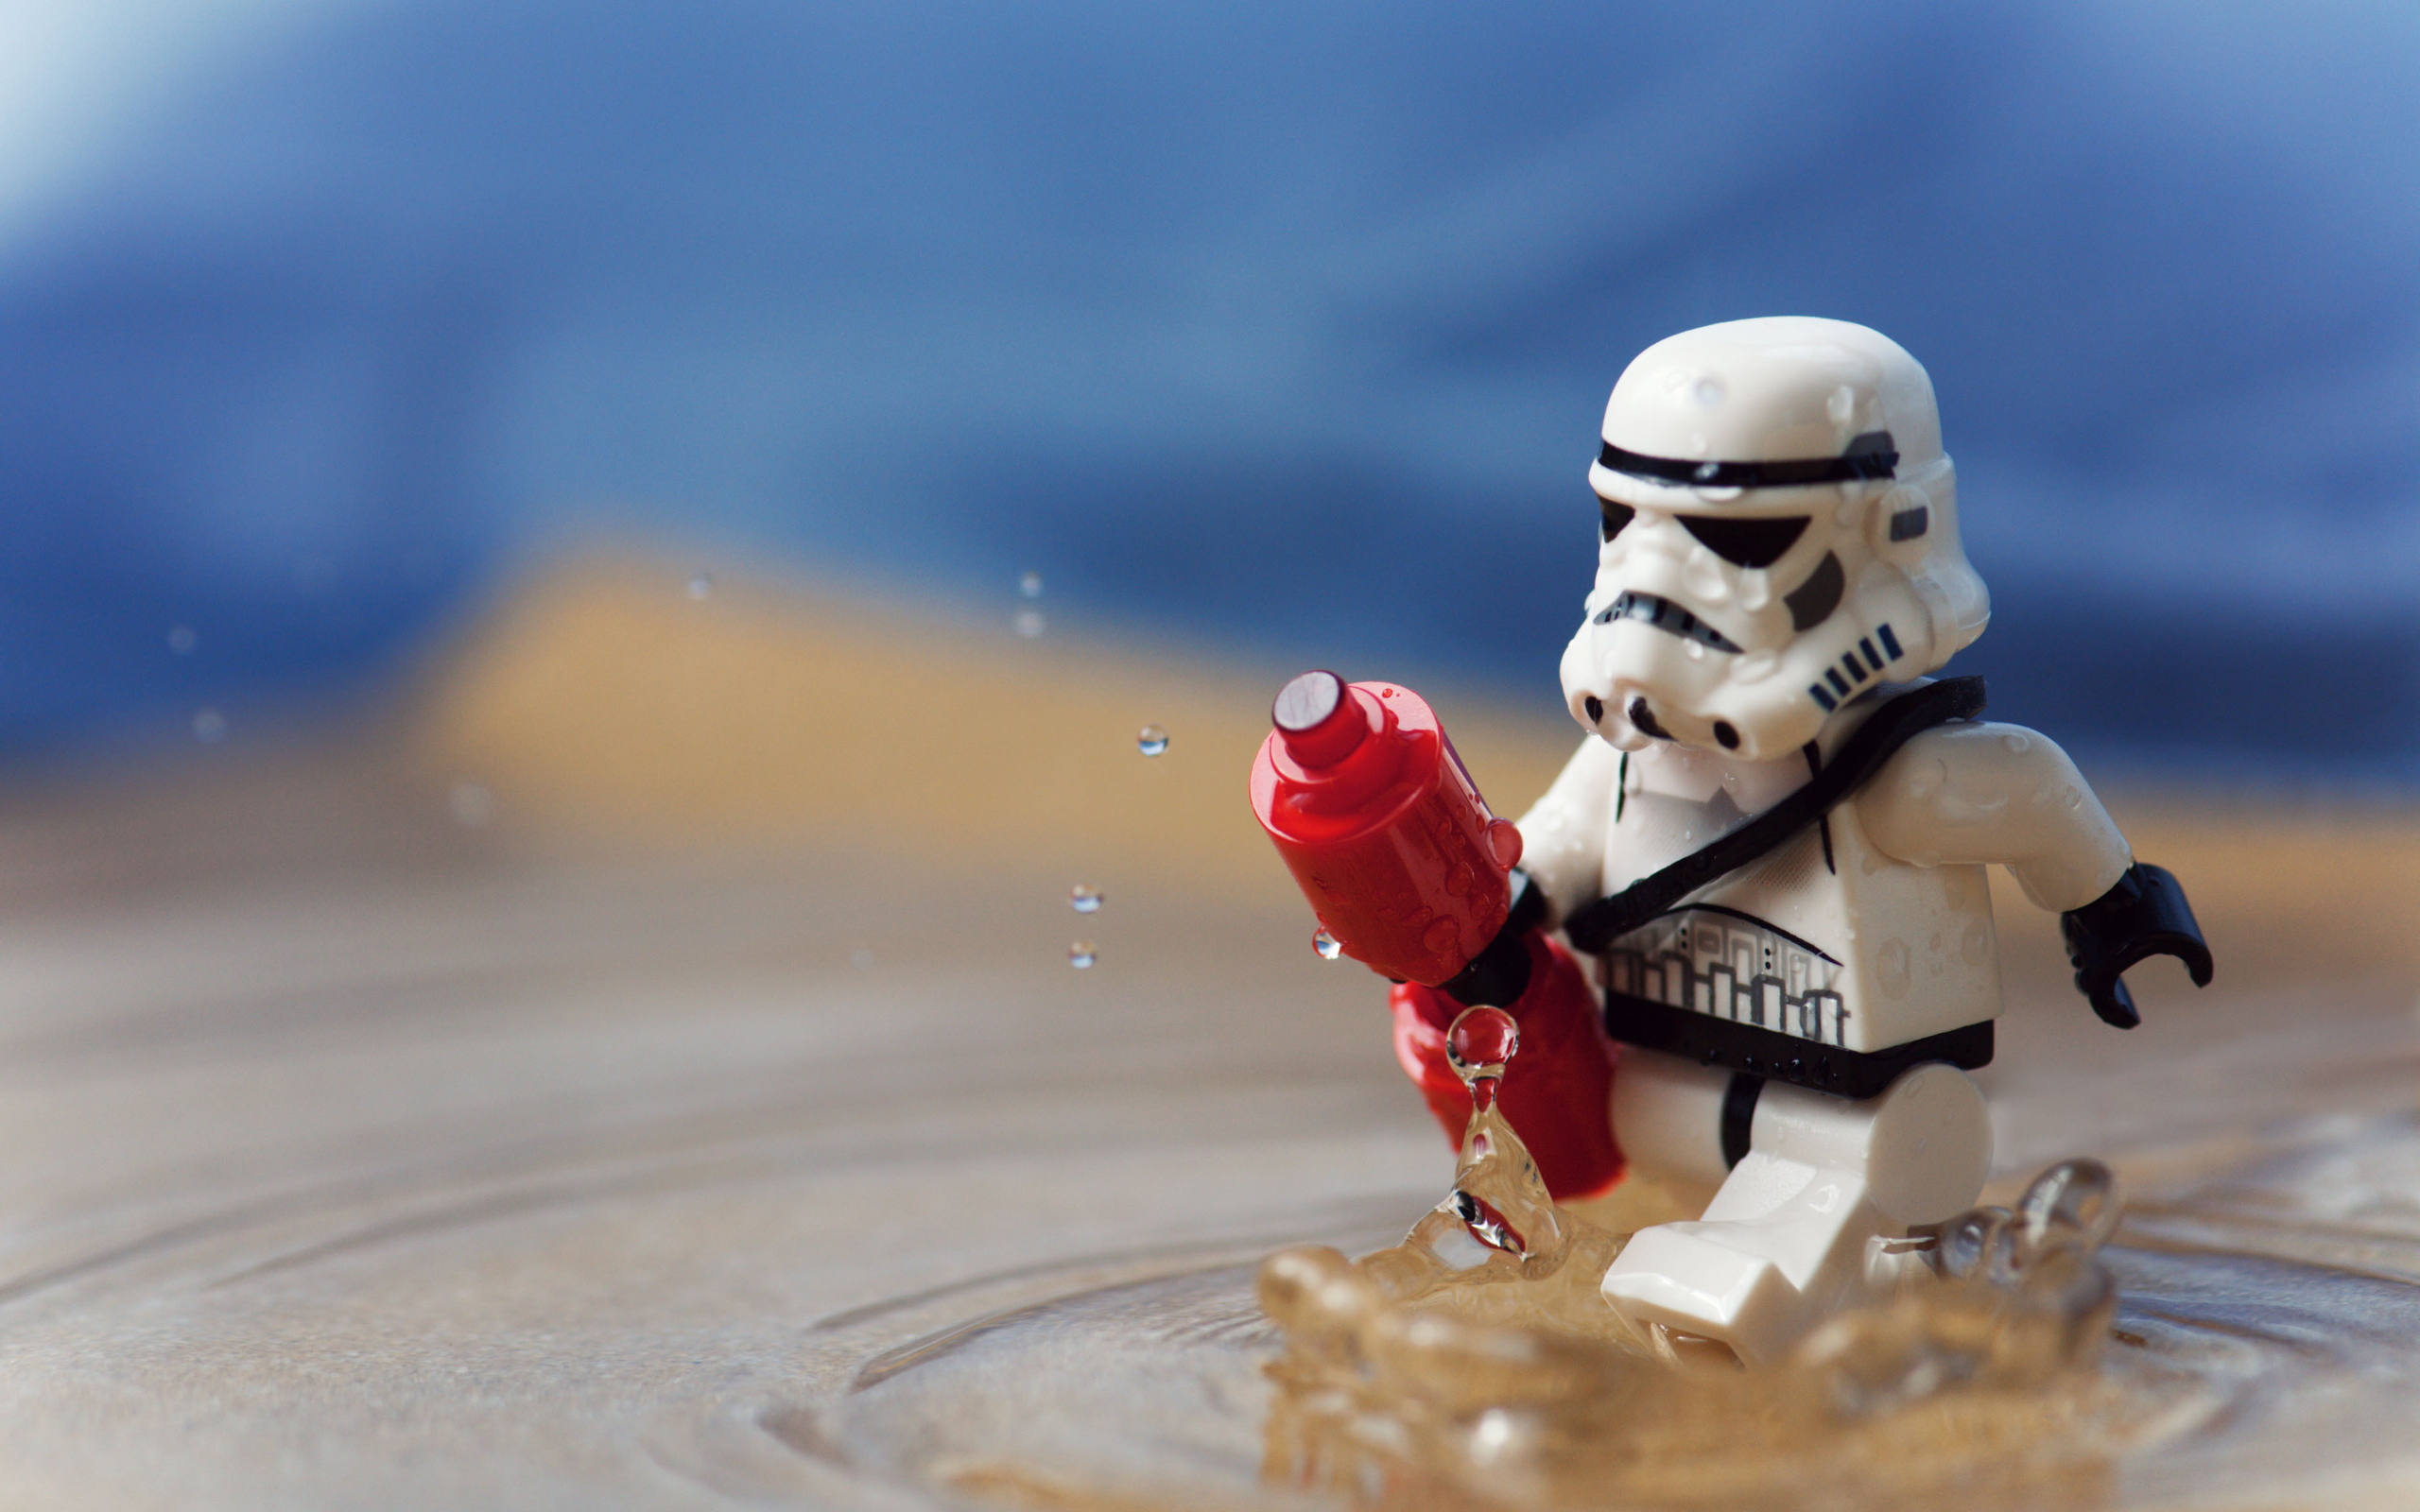 Cool Lego Star Wars Wallpaper For